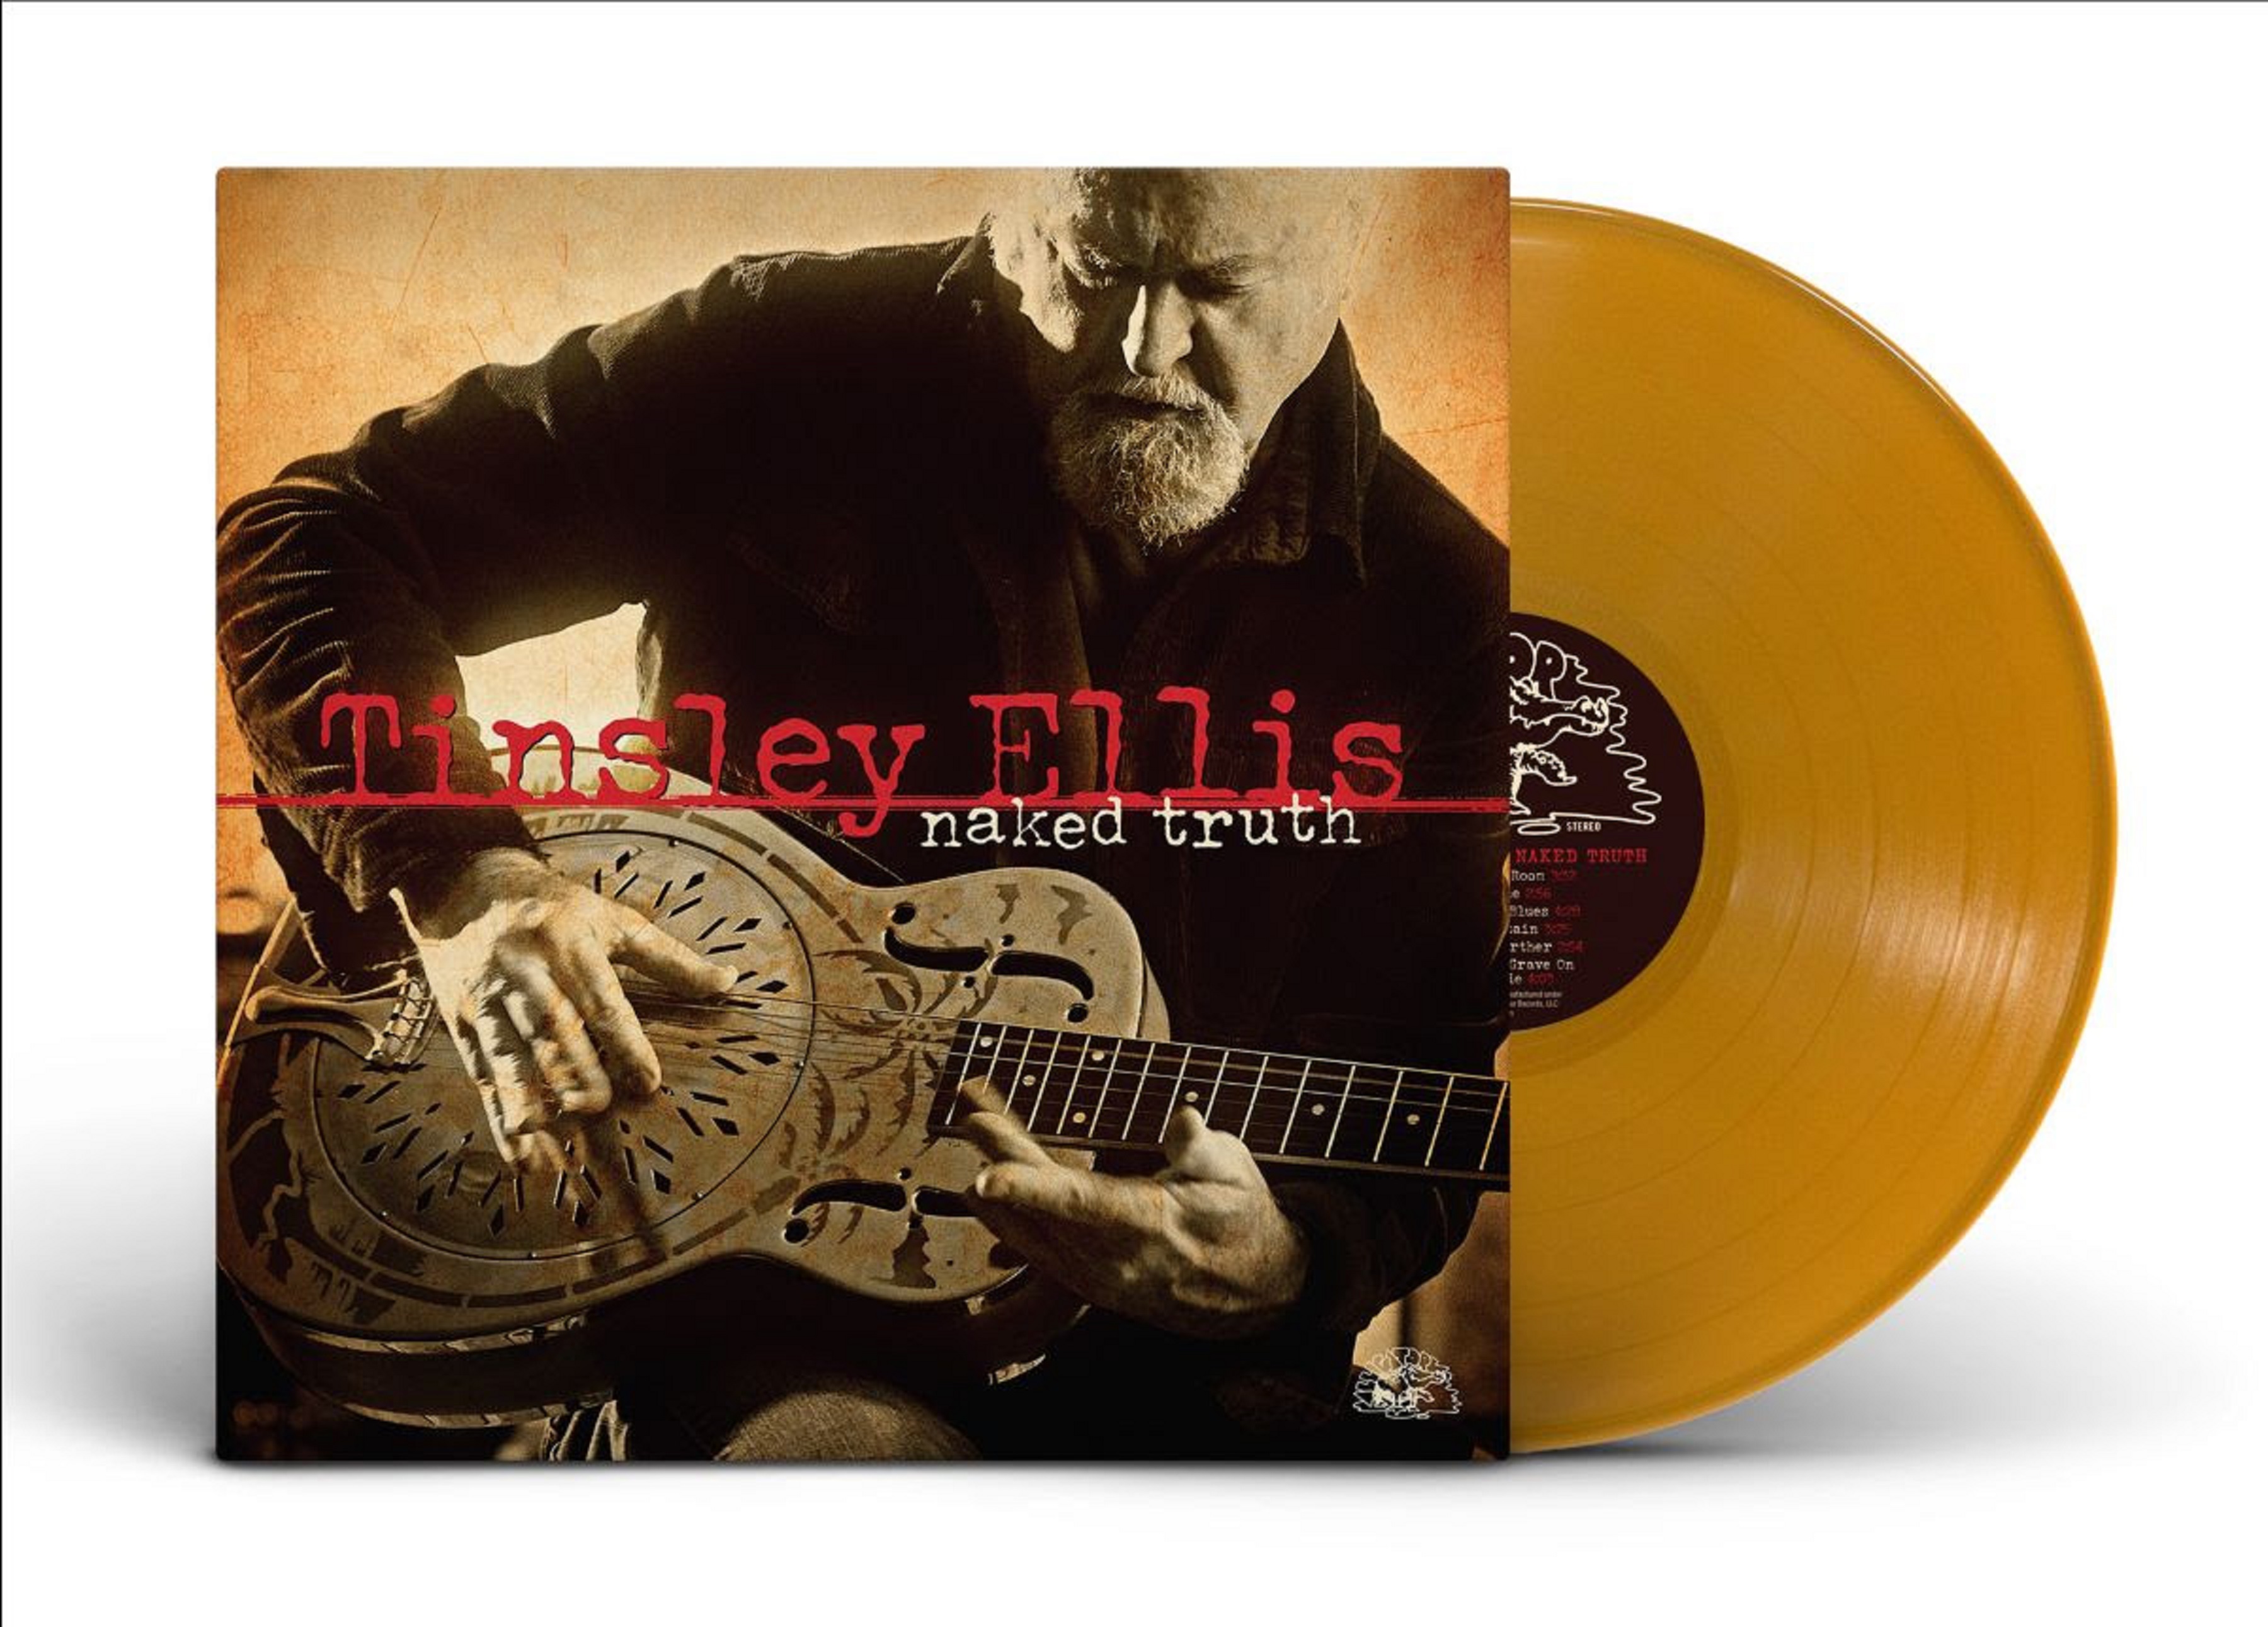 TINSLEY ELLIS' NEW ALBUM, "NAKED TRUTH", OUT NOW